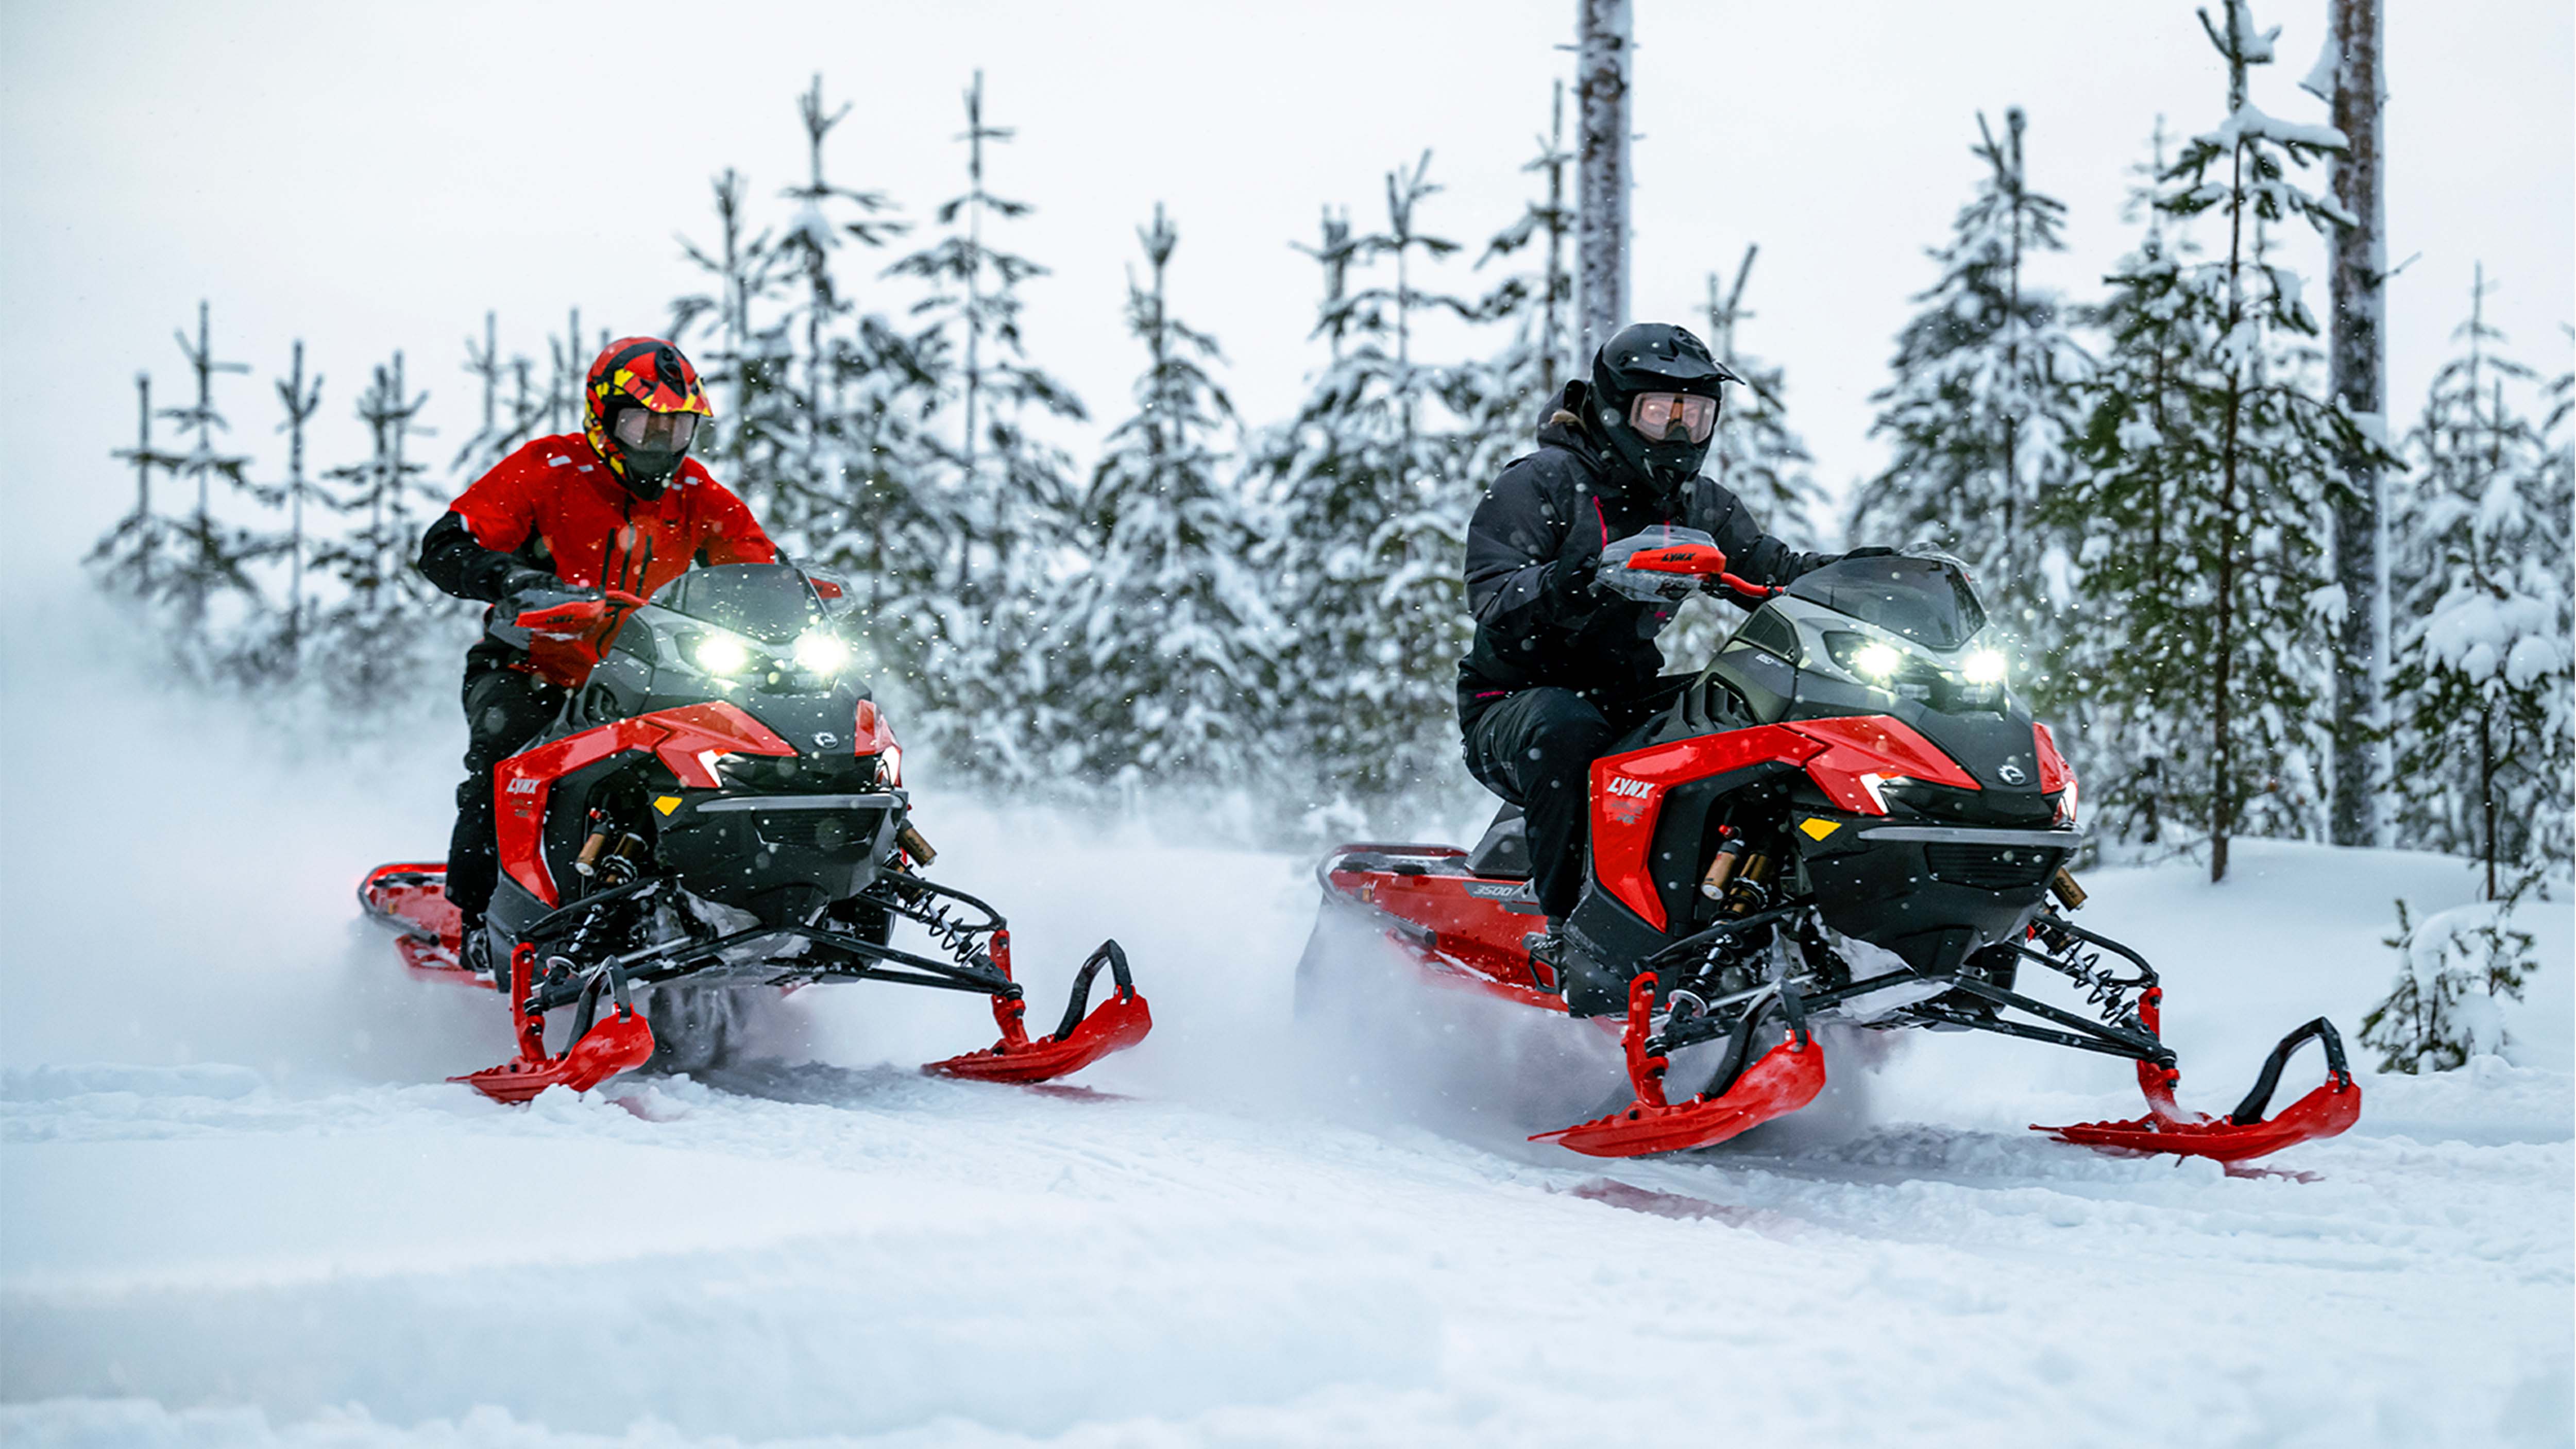 Two Lynx Rave RE snowmobiles riding on trail side by side